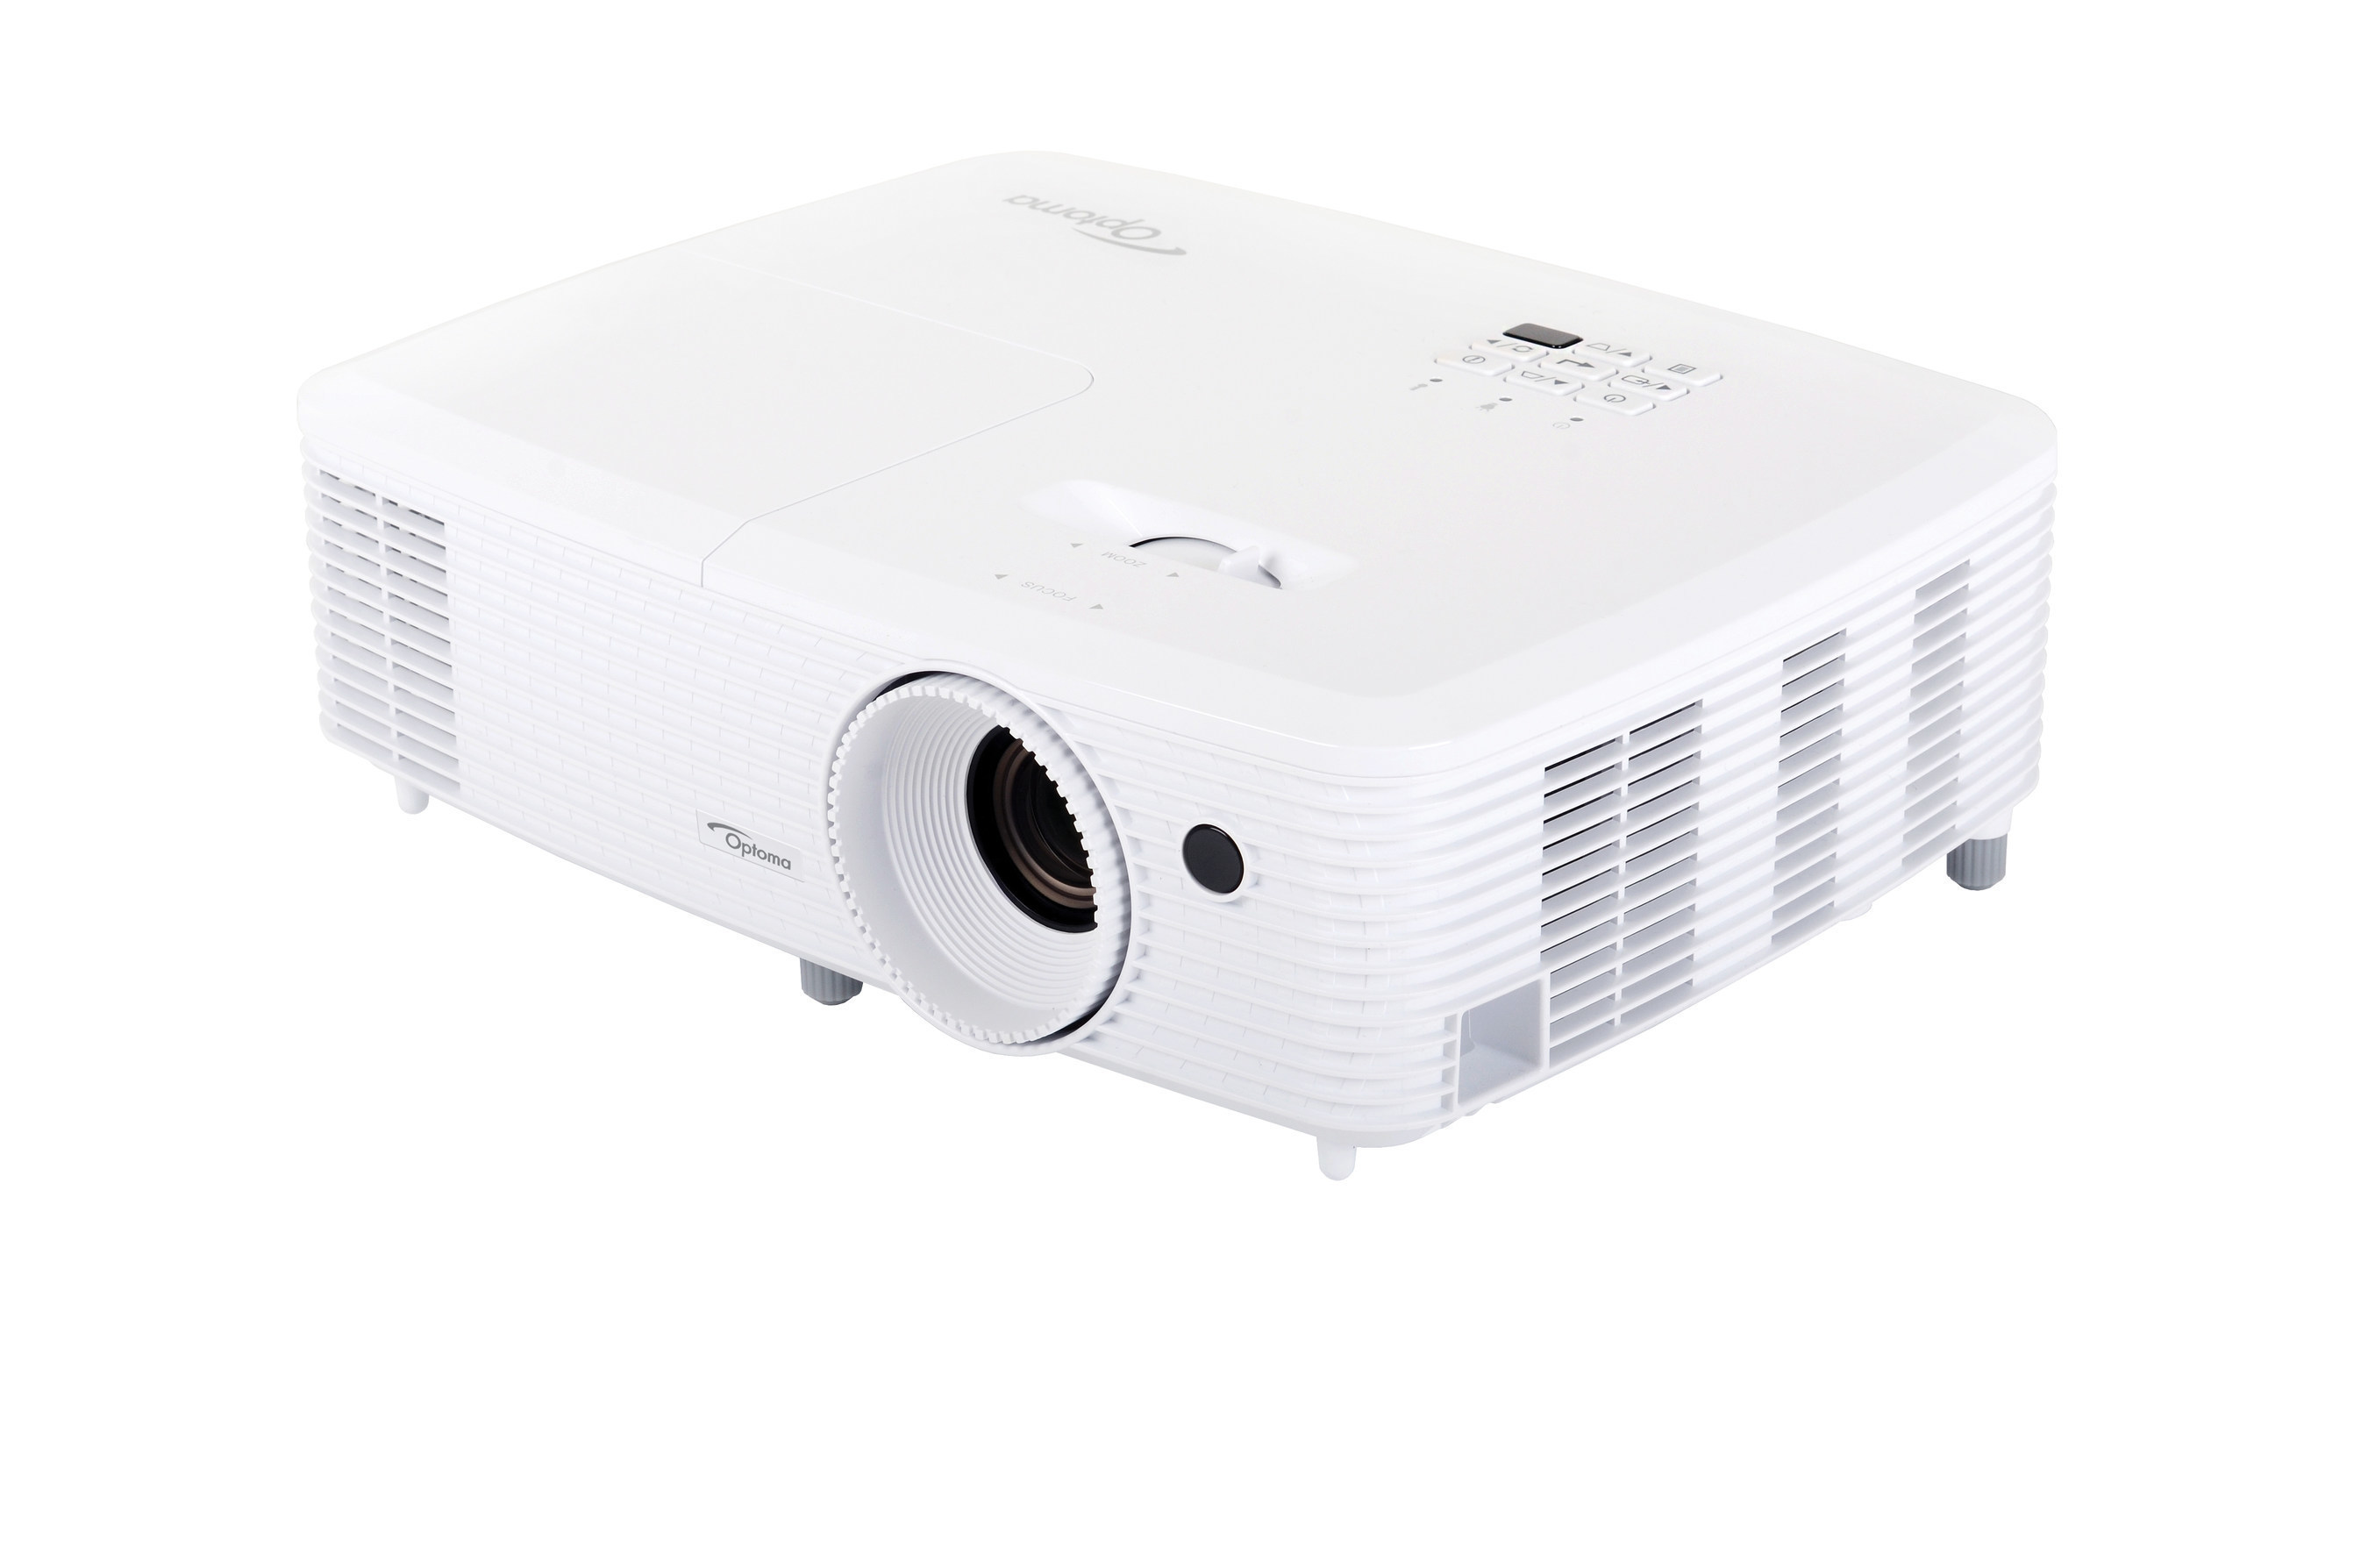 The Optoma HD27 1080p home theater projector improves upon the impressive Optoma HD26, a top-two selling 1080p projector in the U.S. market.